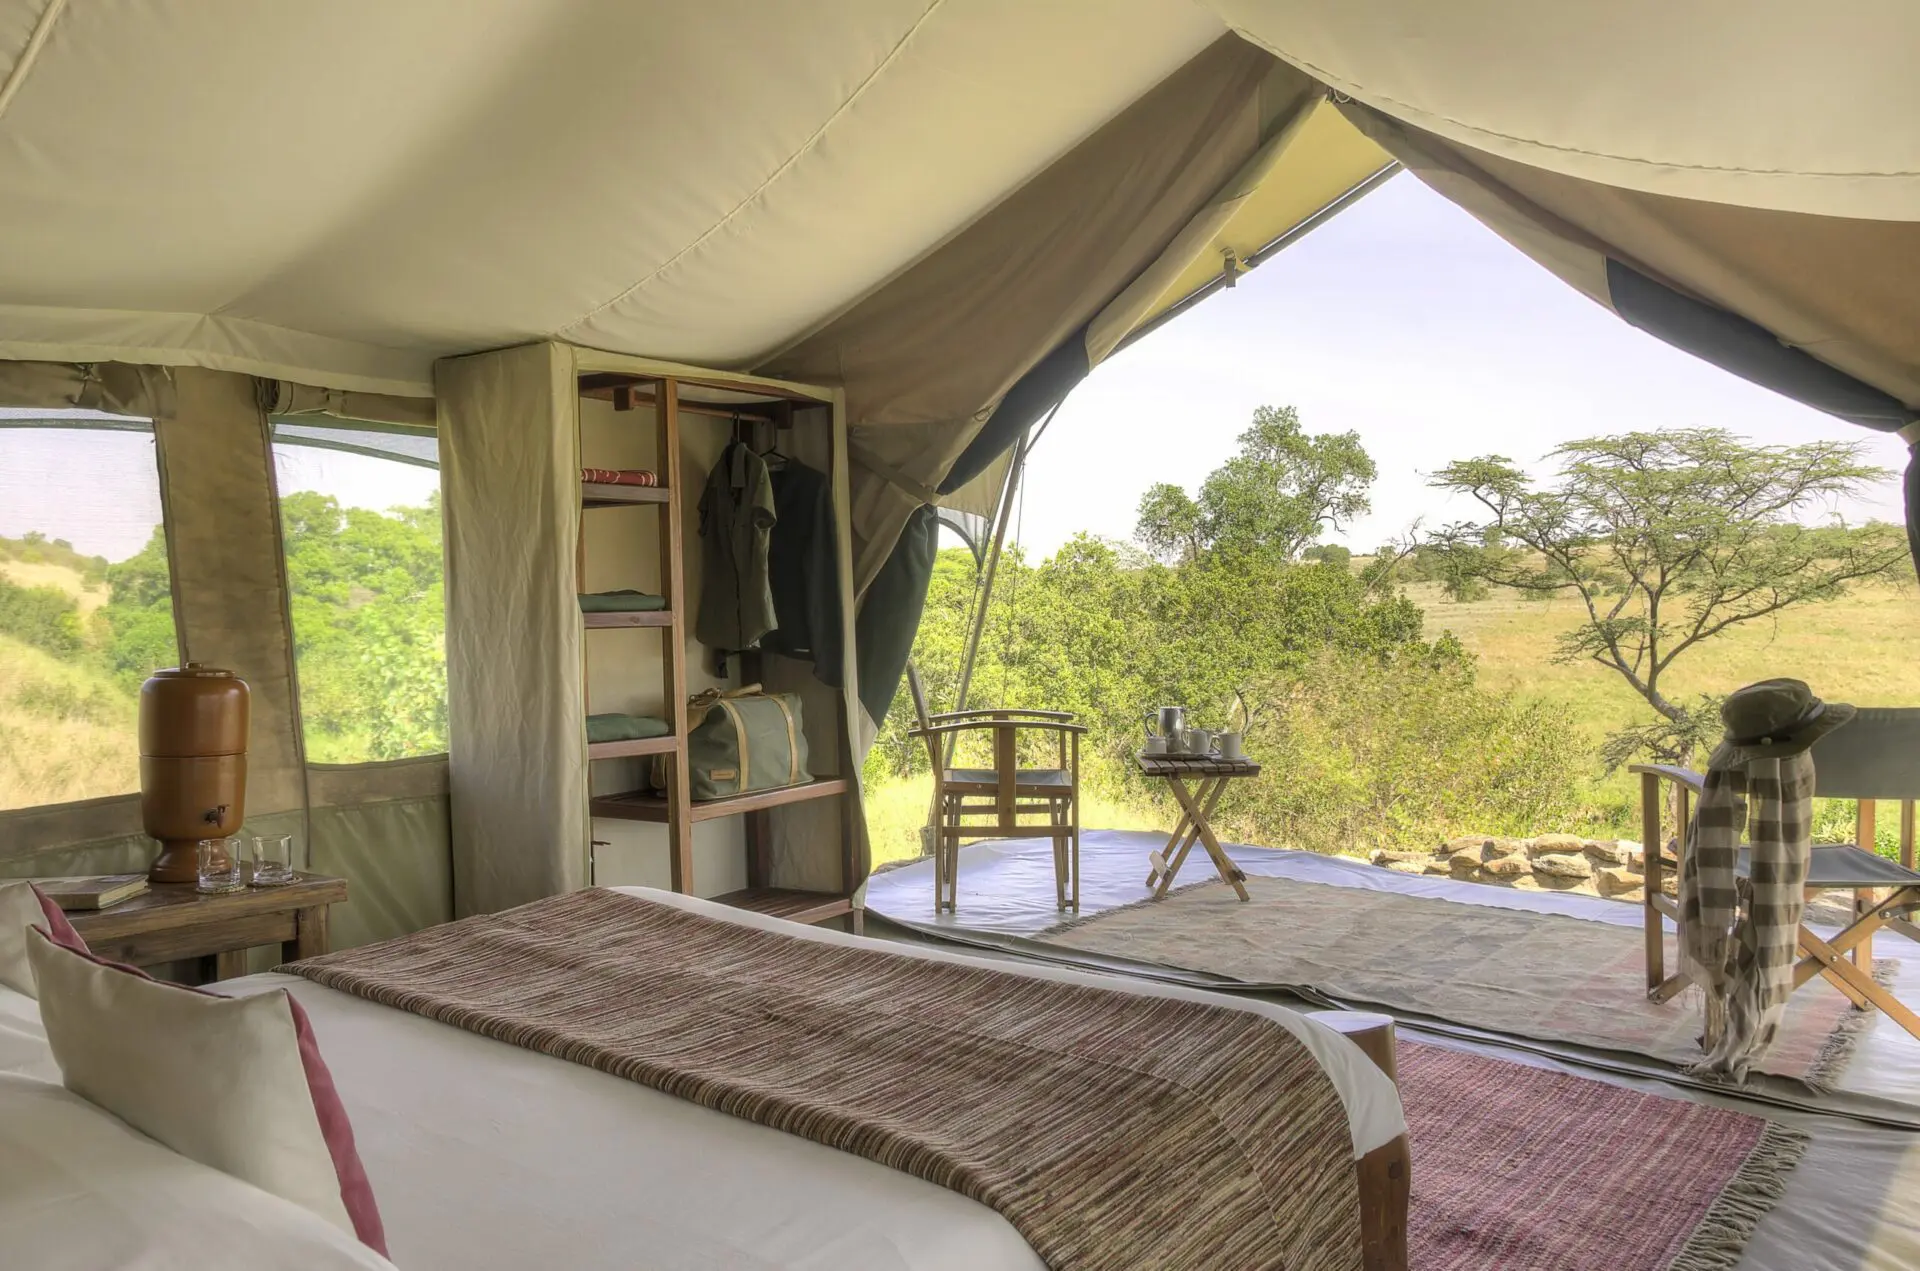 interior view of a tent at Kicheche Mara with a bed, vanity, and chairs overlooking the bush